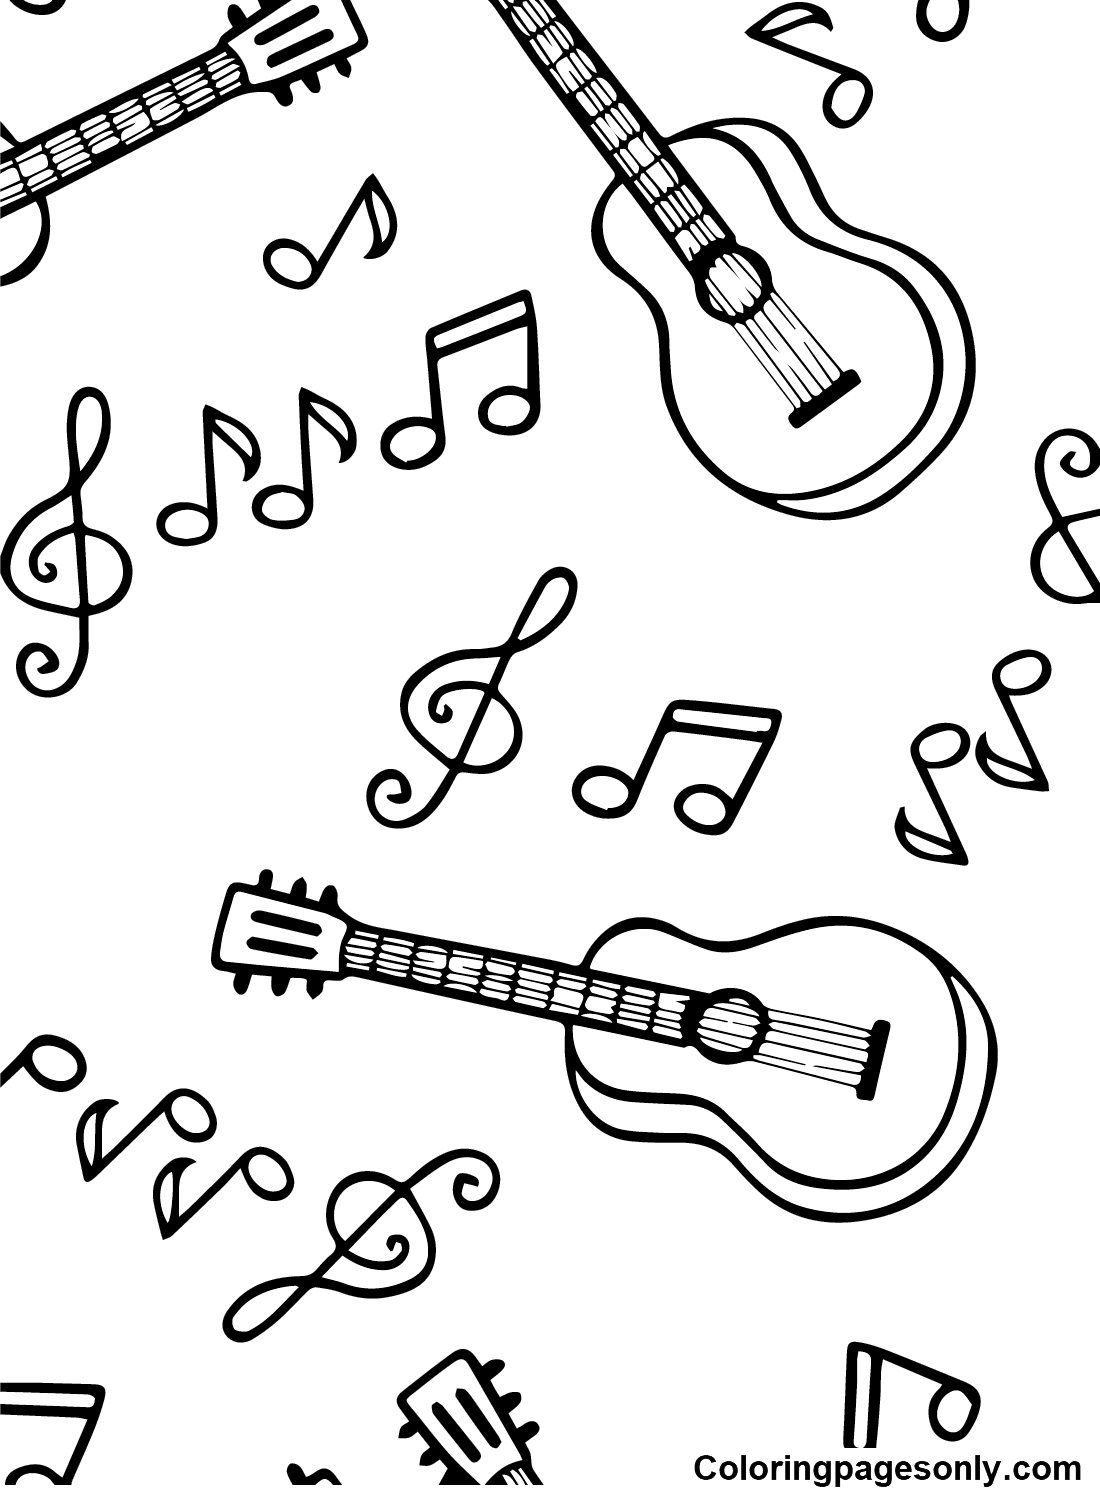 Guitar Free Coloring Pages